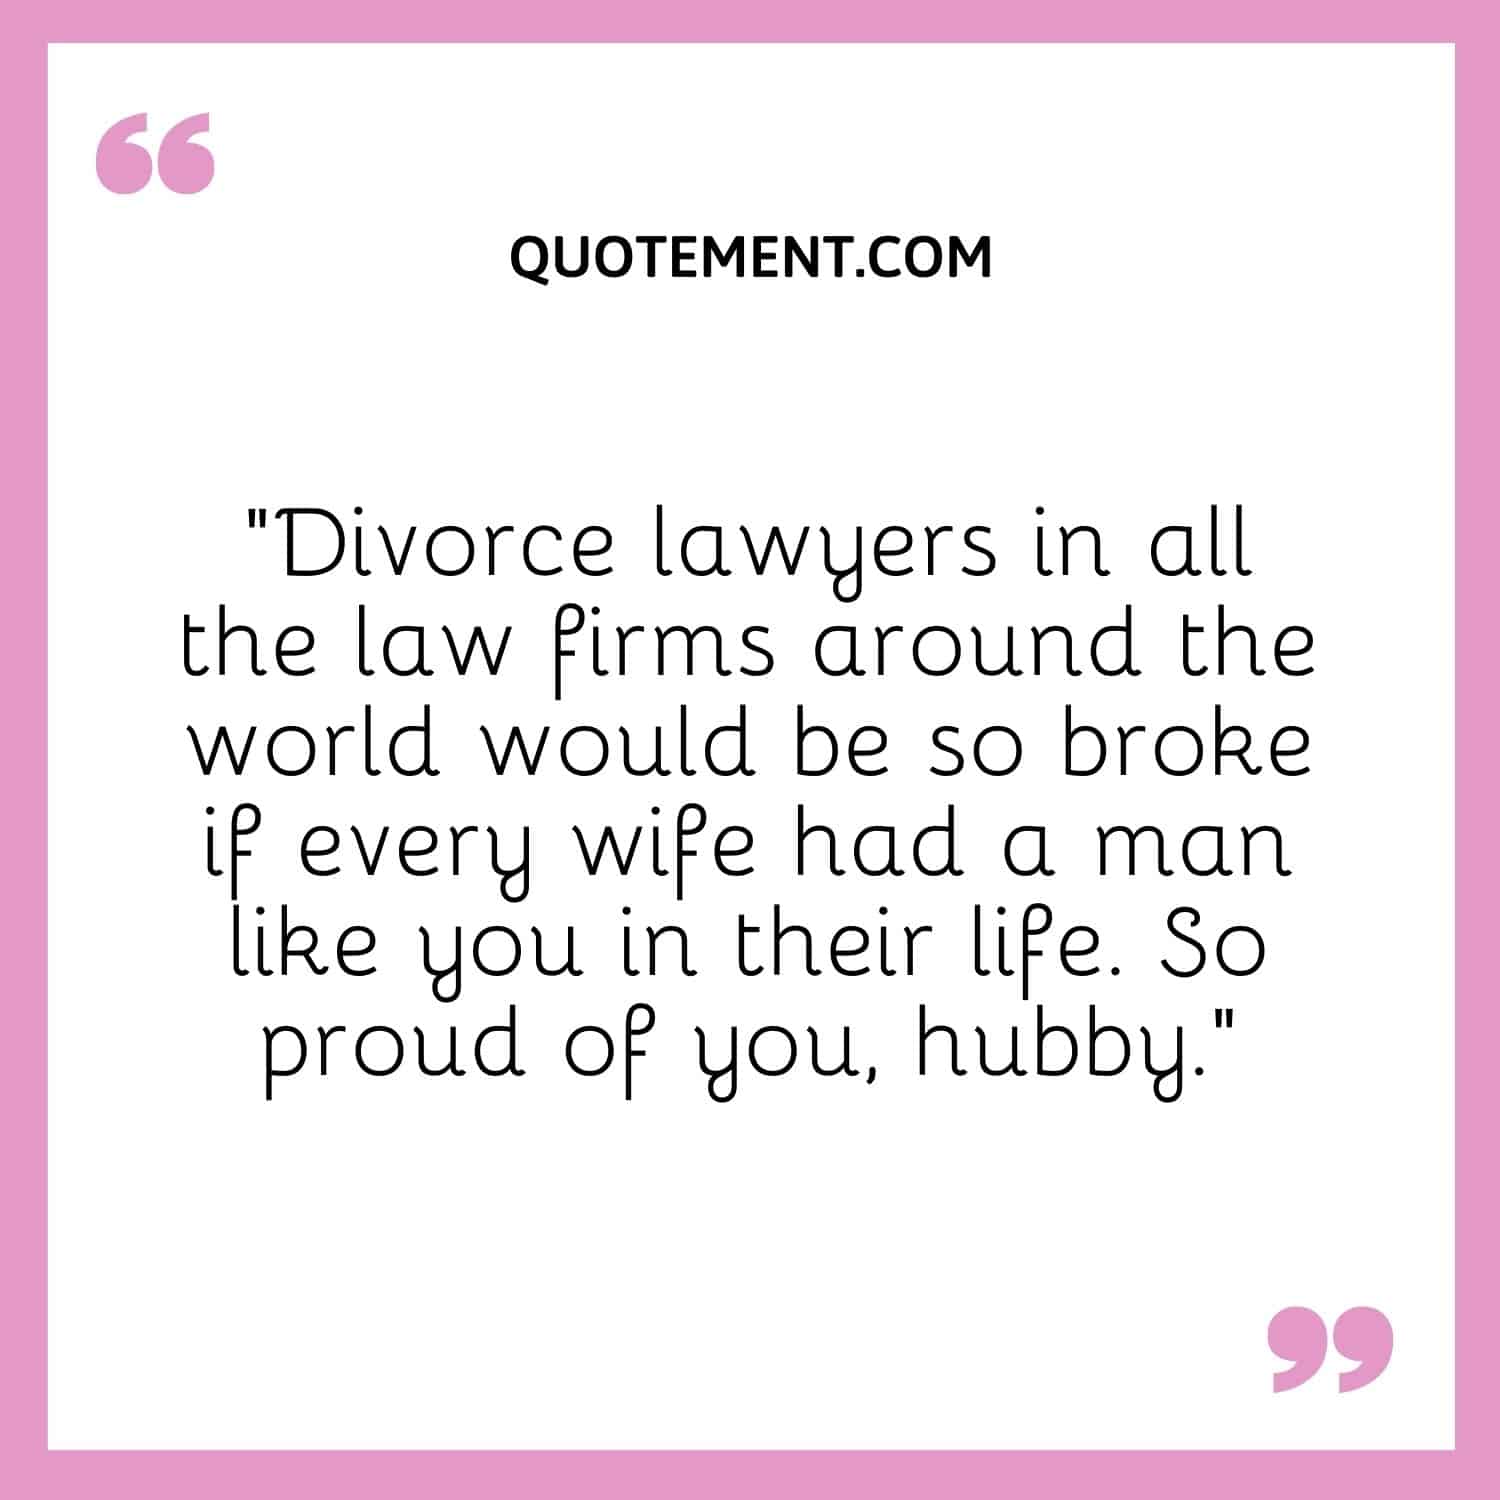 “Divorce lawyers in all the law firms around the world would be so broke if every wife had a man like you in their life. So proud of you, hubby.”